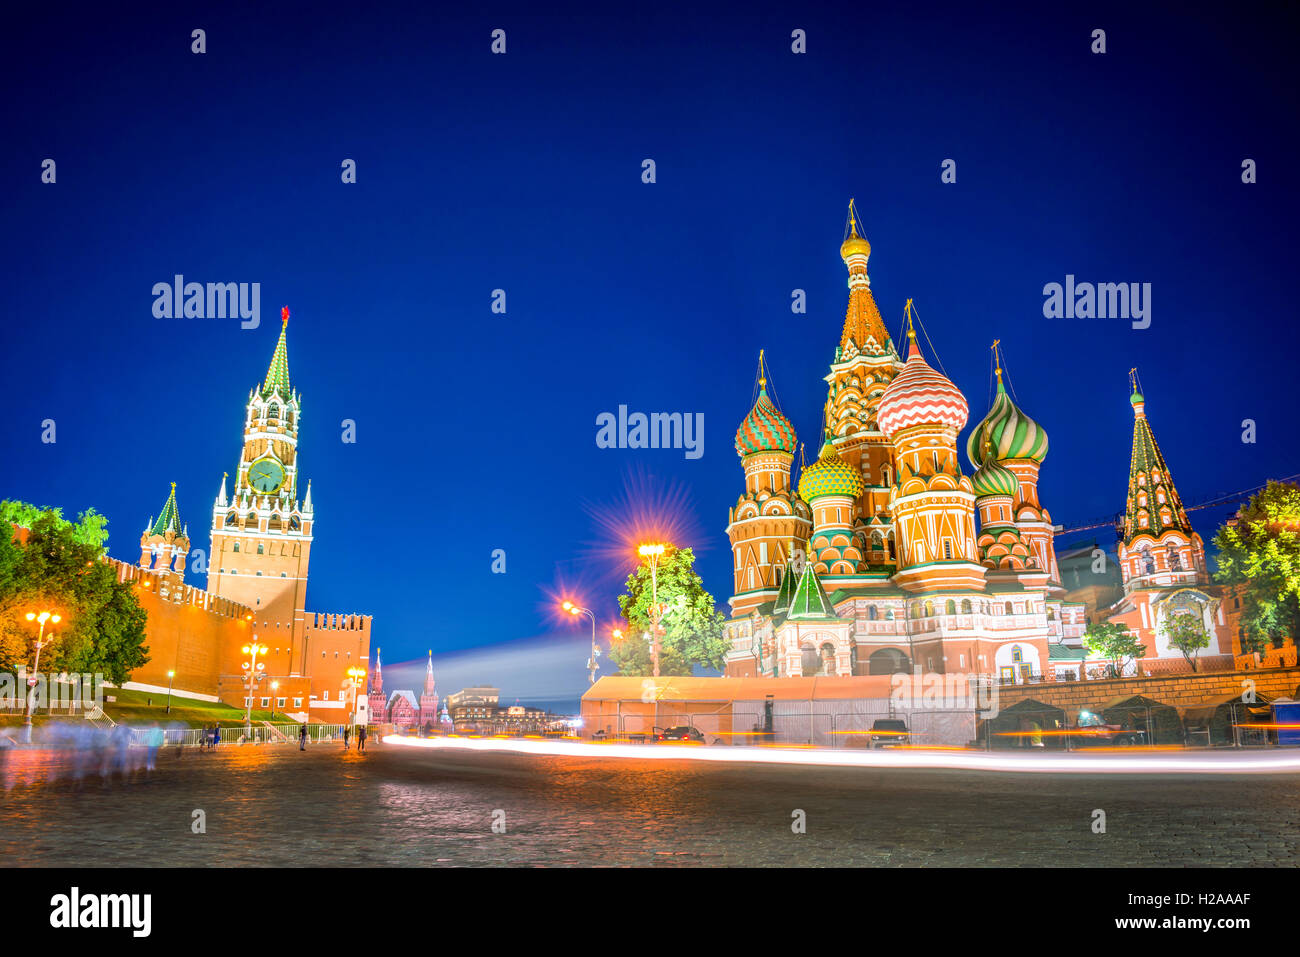 St Basil's cathedral and Kremlin on Red Square at night, Moscow, Russia Stock Photo